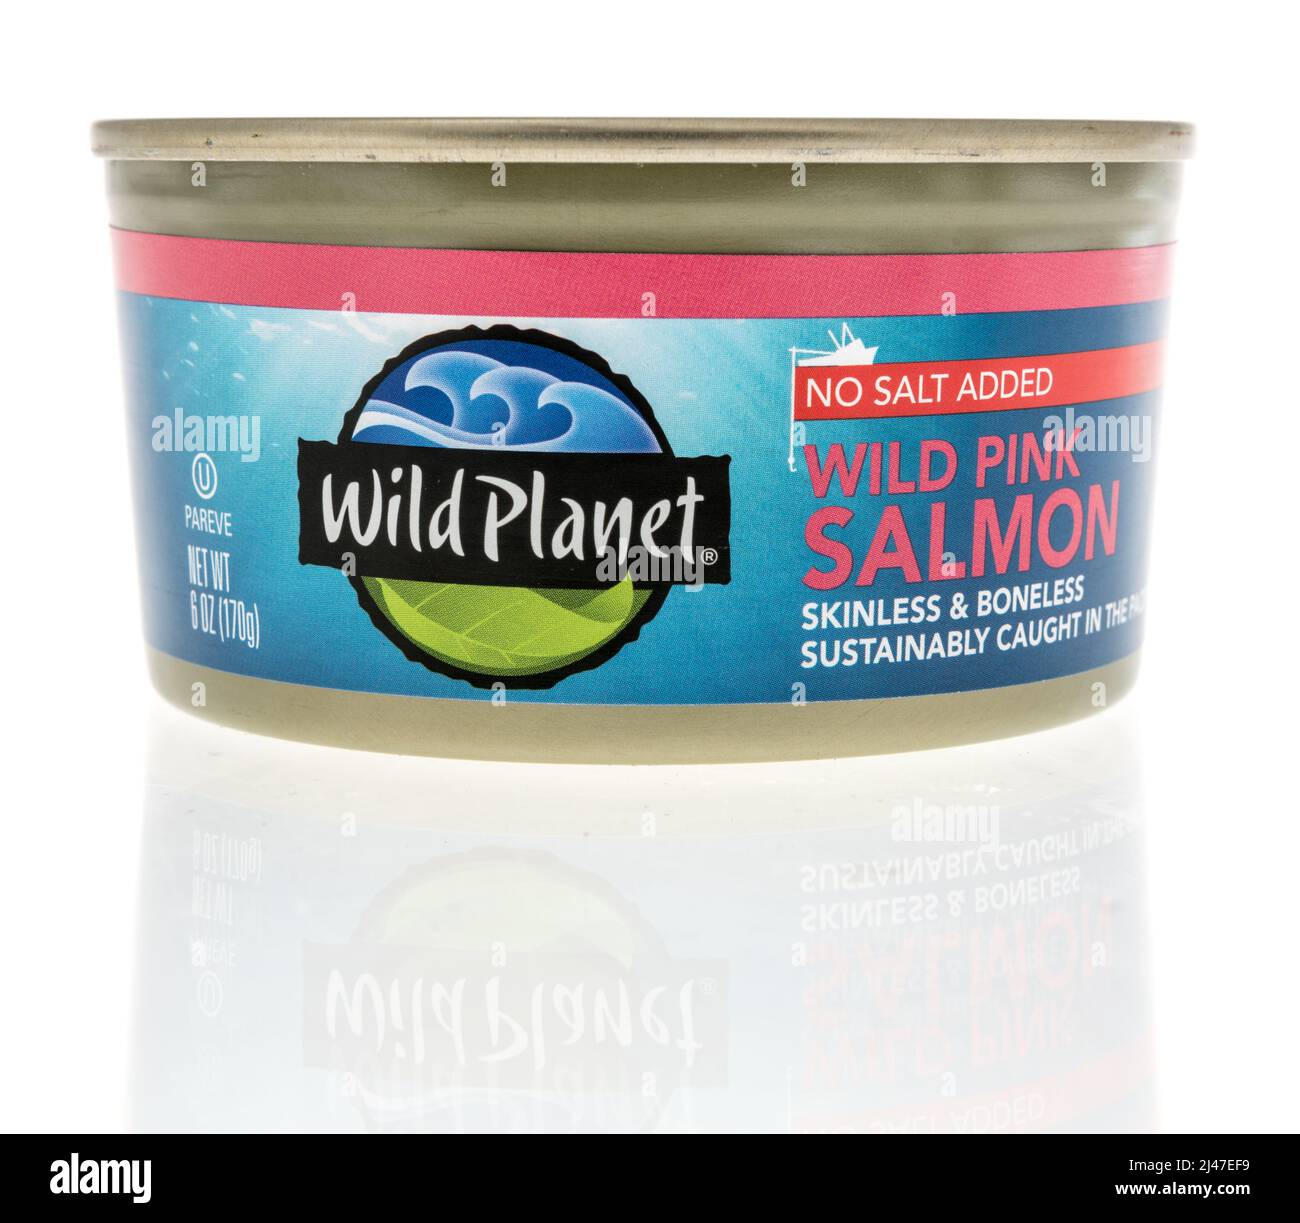 Winneconne, WI -10 April 2022: A can of Wild Planet wild pink salmon on an isolated background Stock Photo